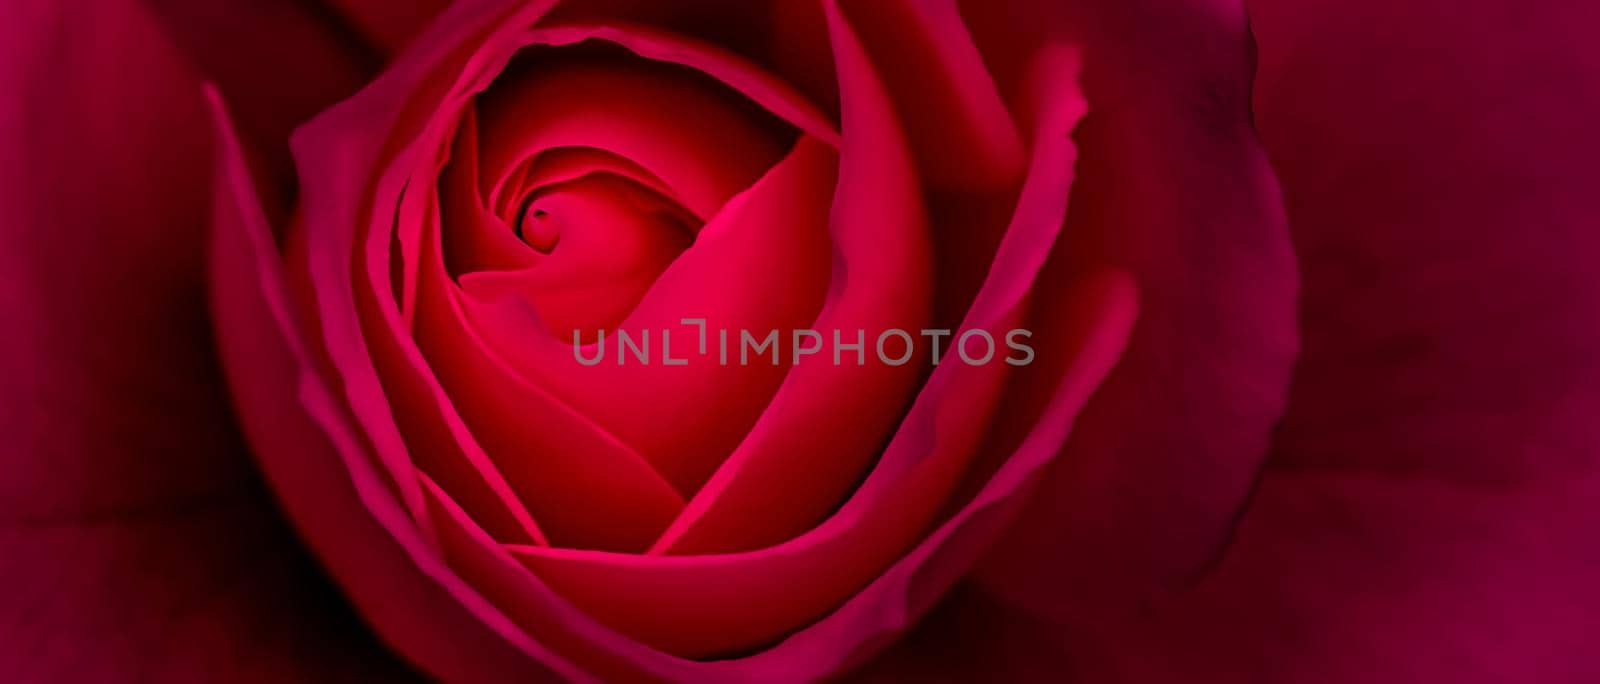 Botanical concept, invitation card - Soft focus, abstract floral background, red rose flower. Macro flowers backdrop for holiday brand design by Olayola